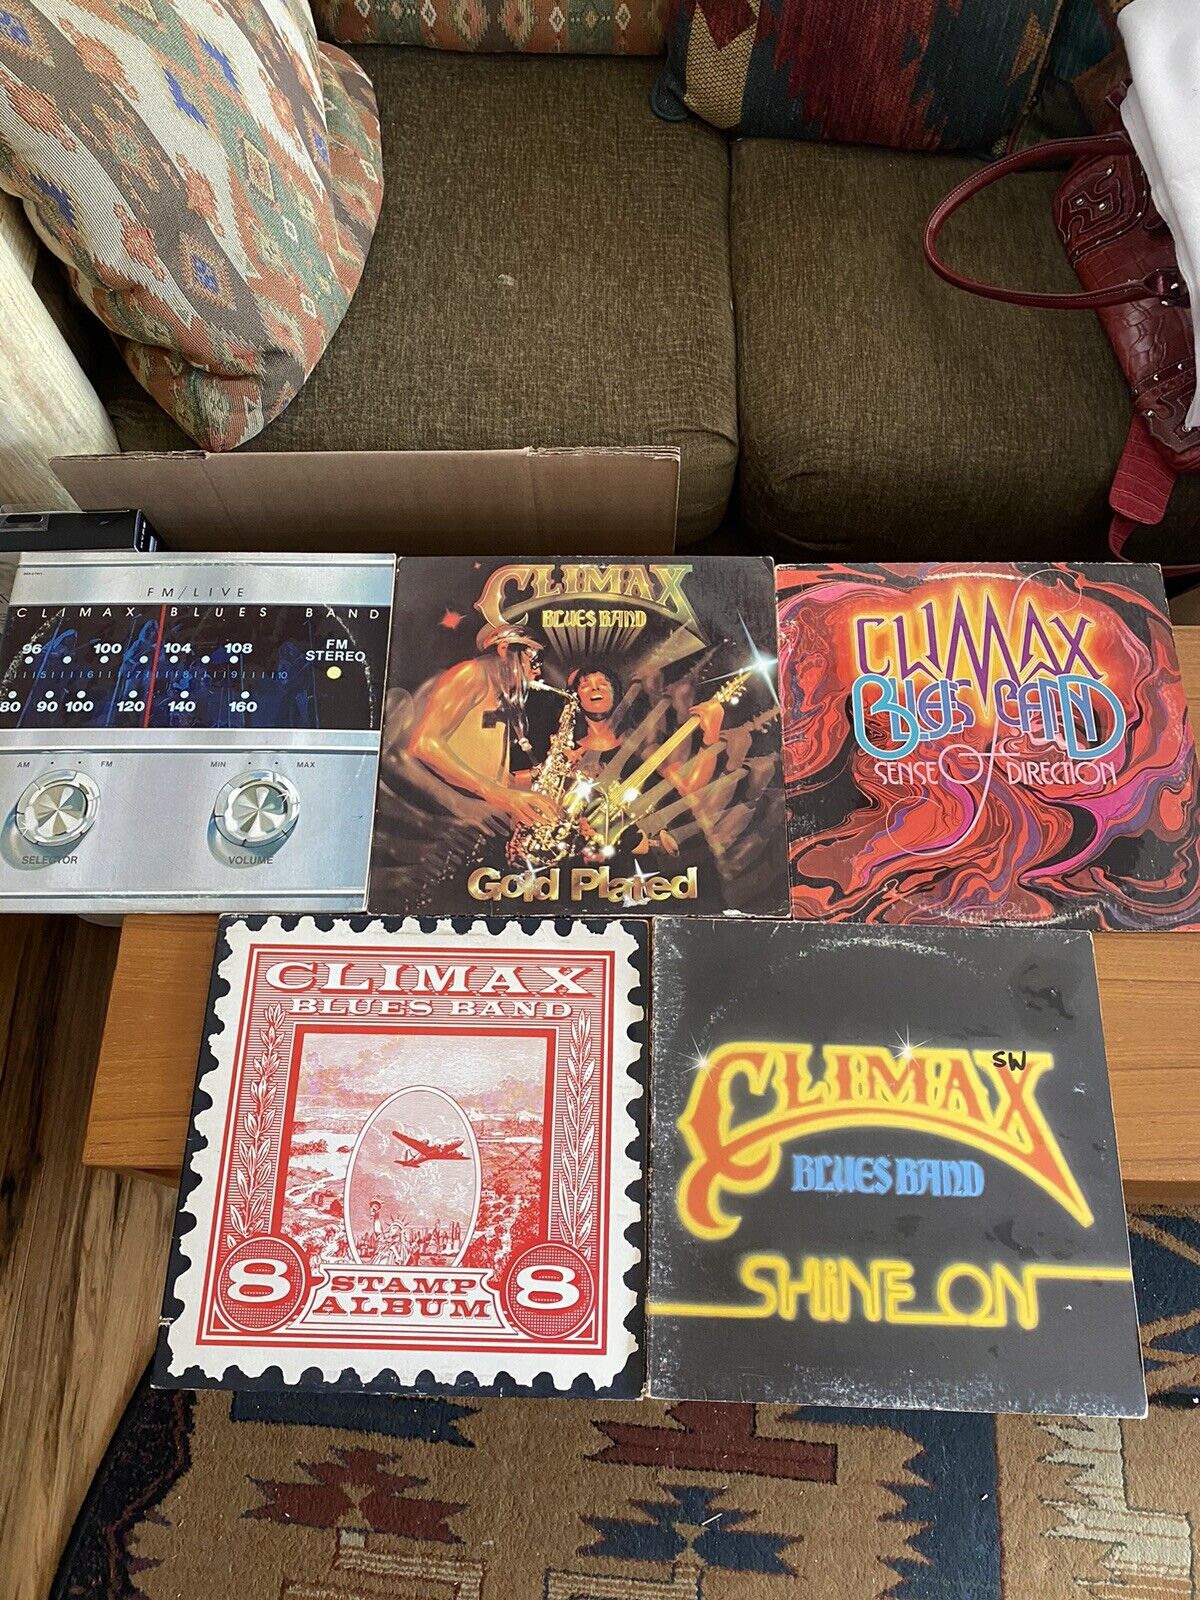 CLIMAX BLUES BAND 5 LPs: FM Live, Gold Plated, Shine On, Stamp, Sense of Direct